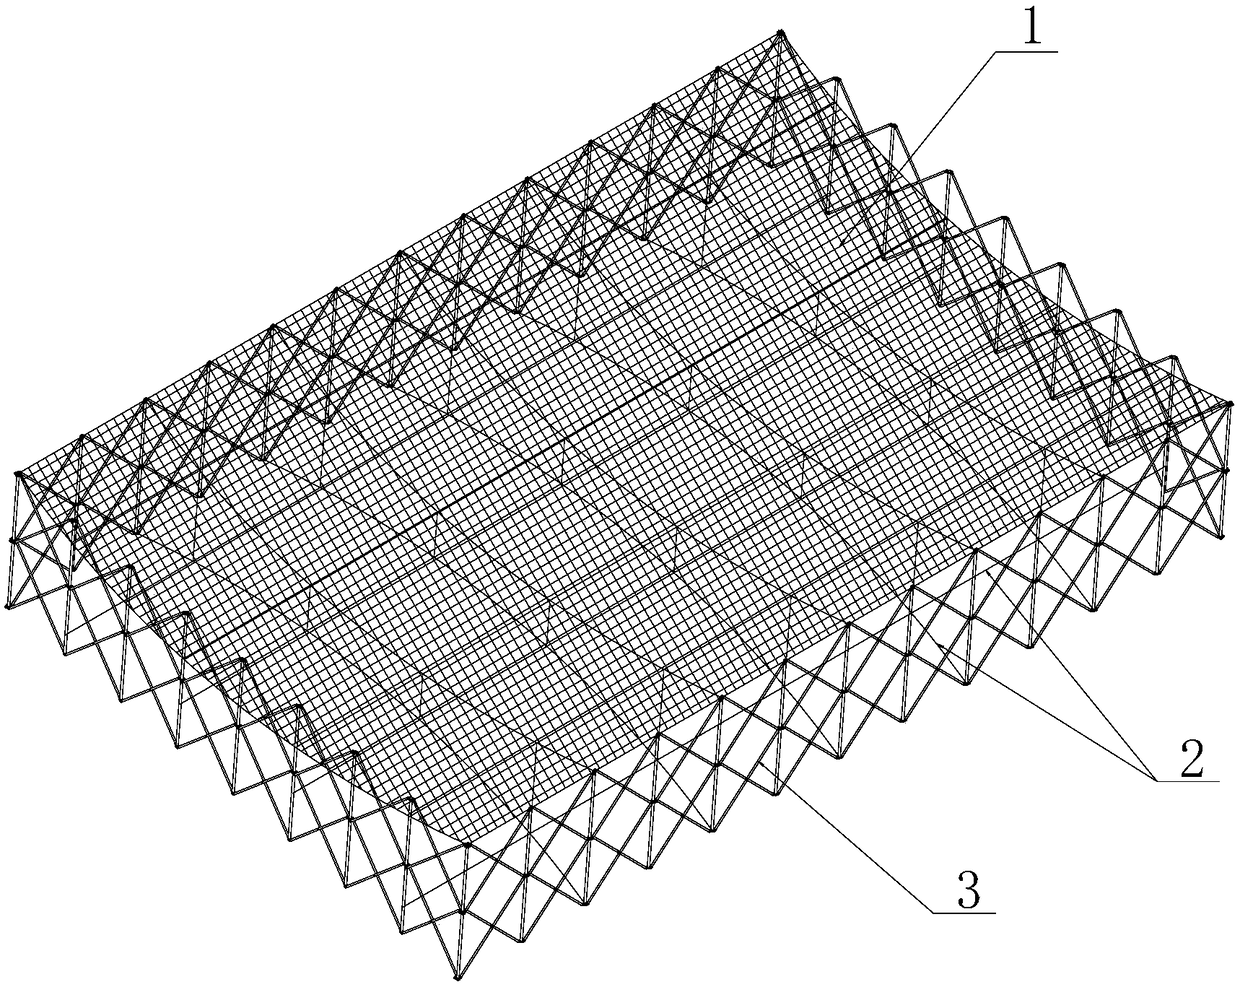 A cable net parabolic cylindrical deployable antenna device based on a double scissors truss mechanism